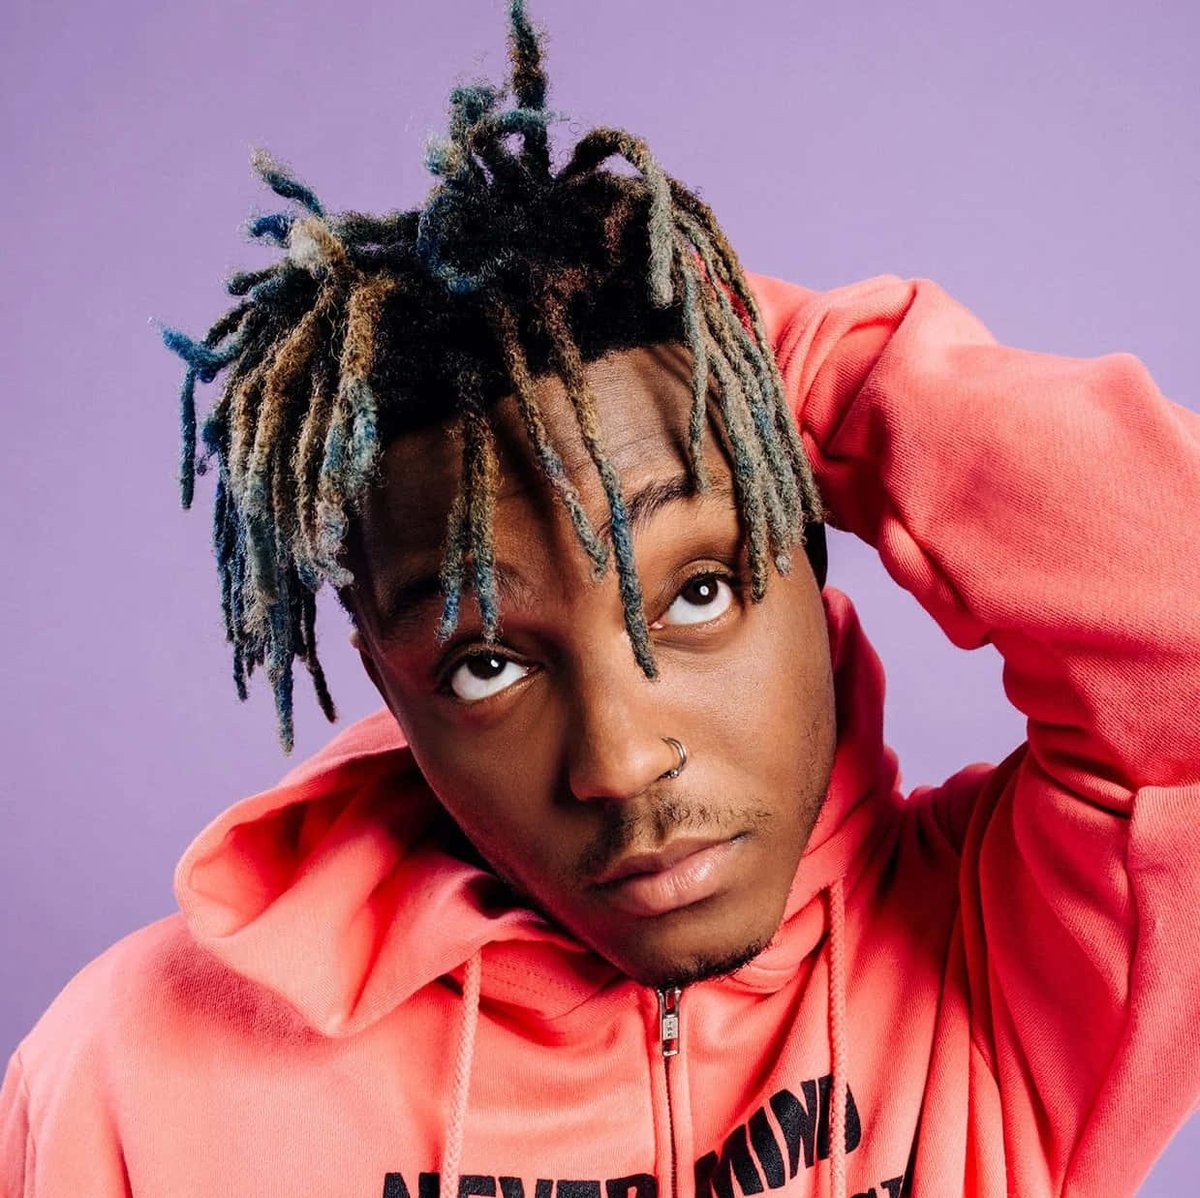 Juice WRLD has now surpassed 100 million RIAA certified units across albums, singles and features.